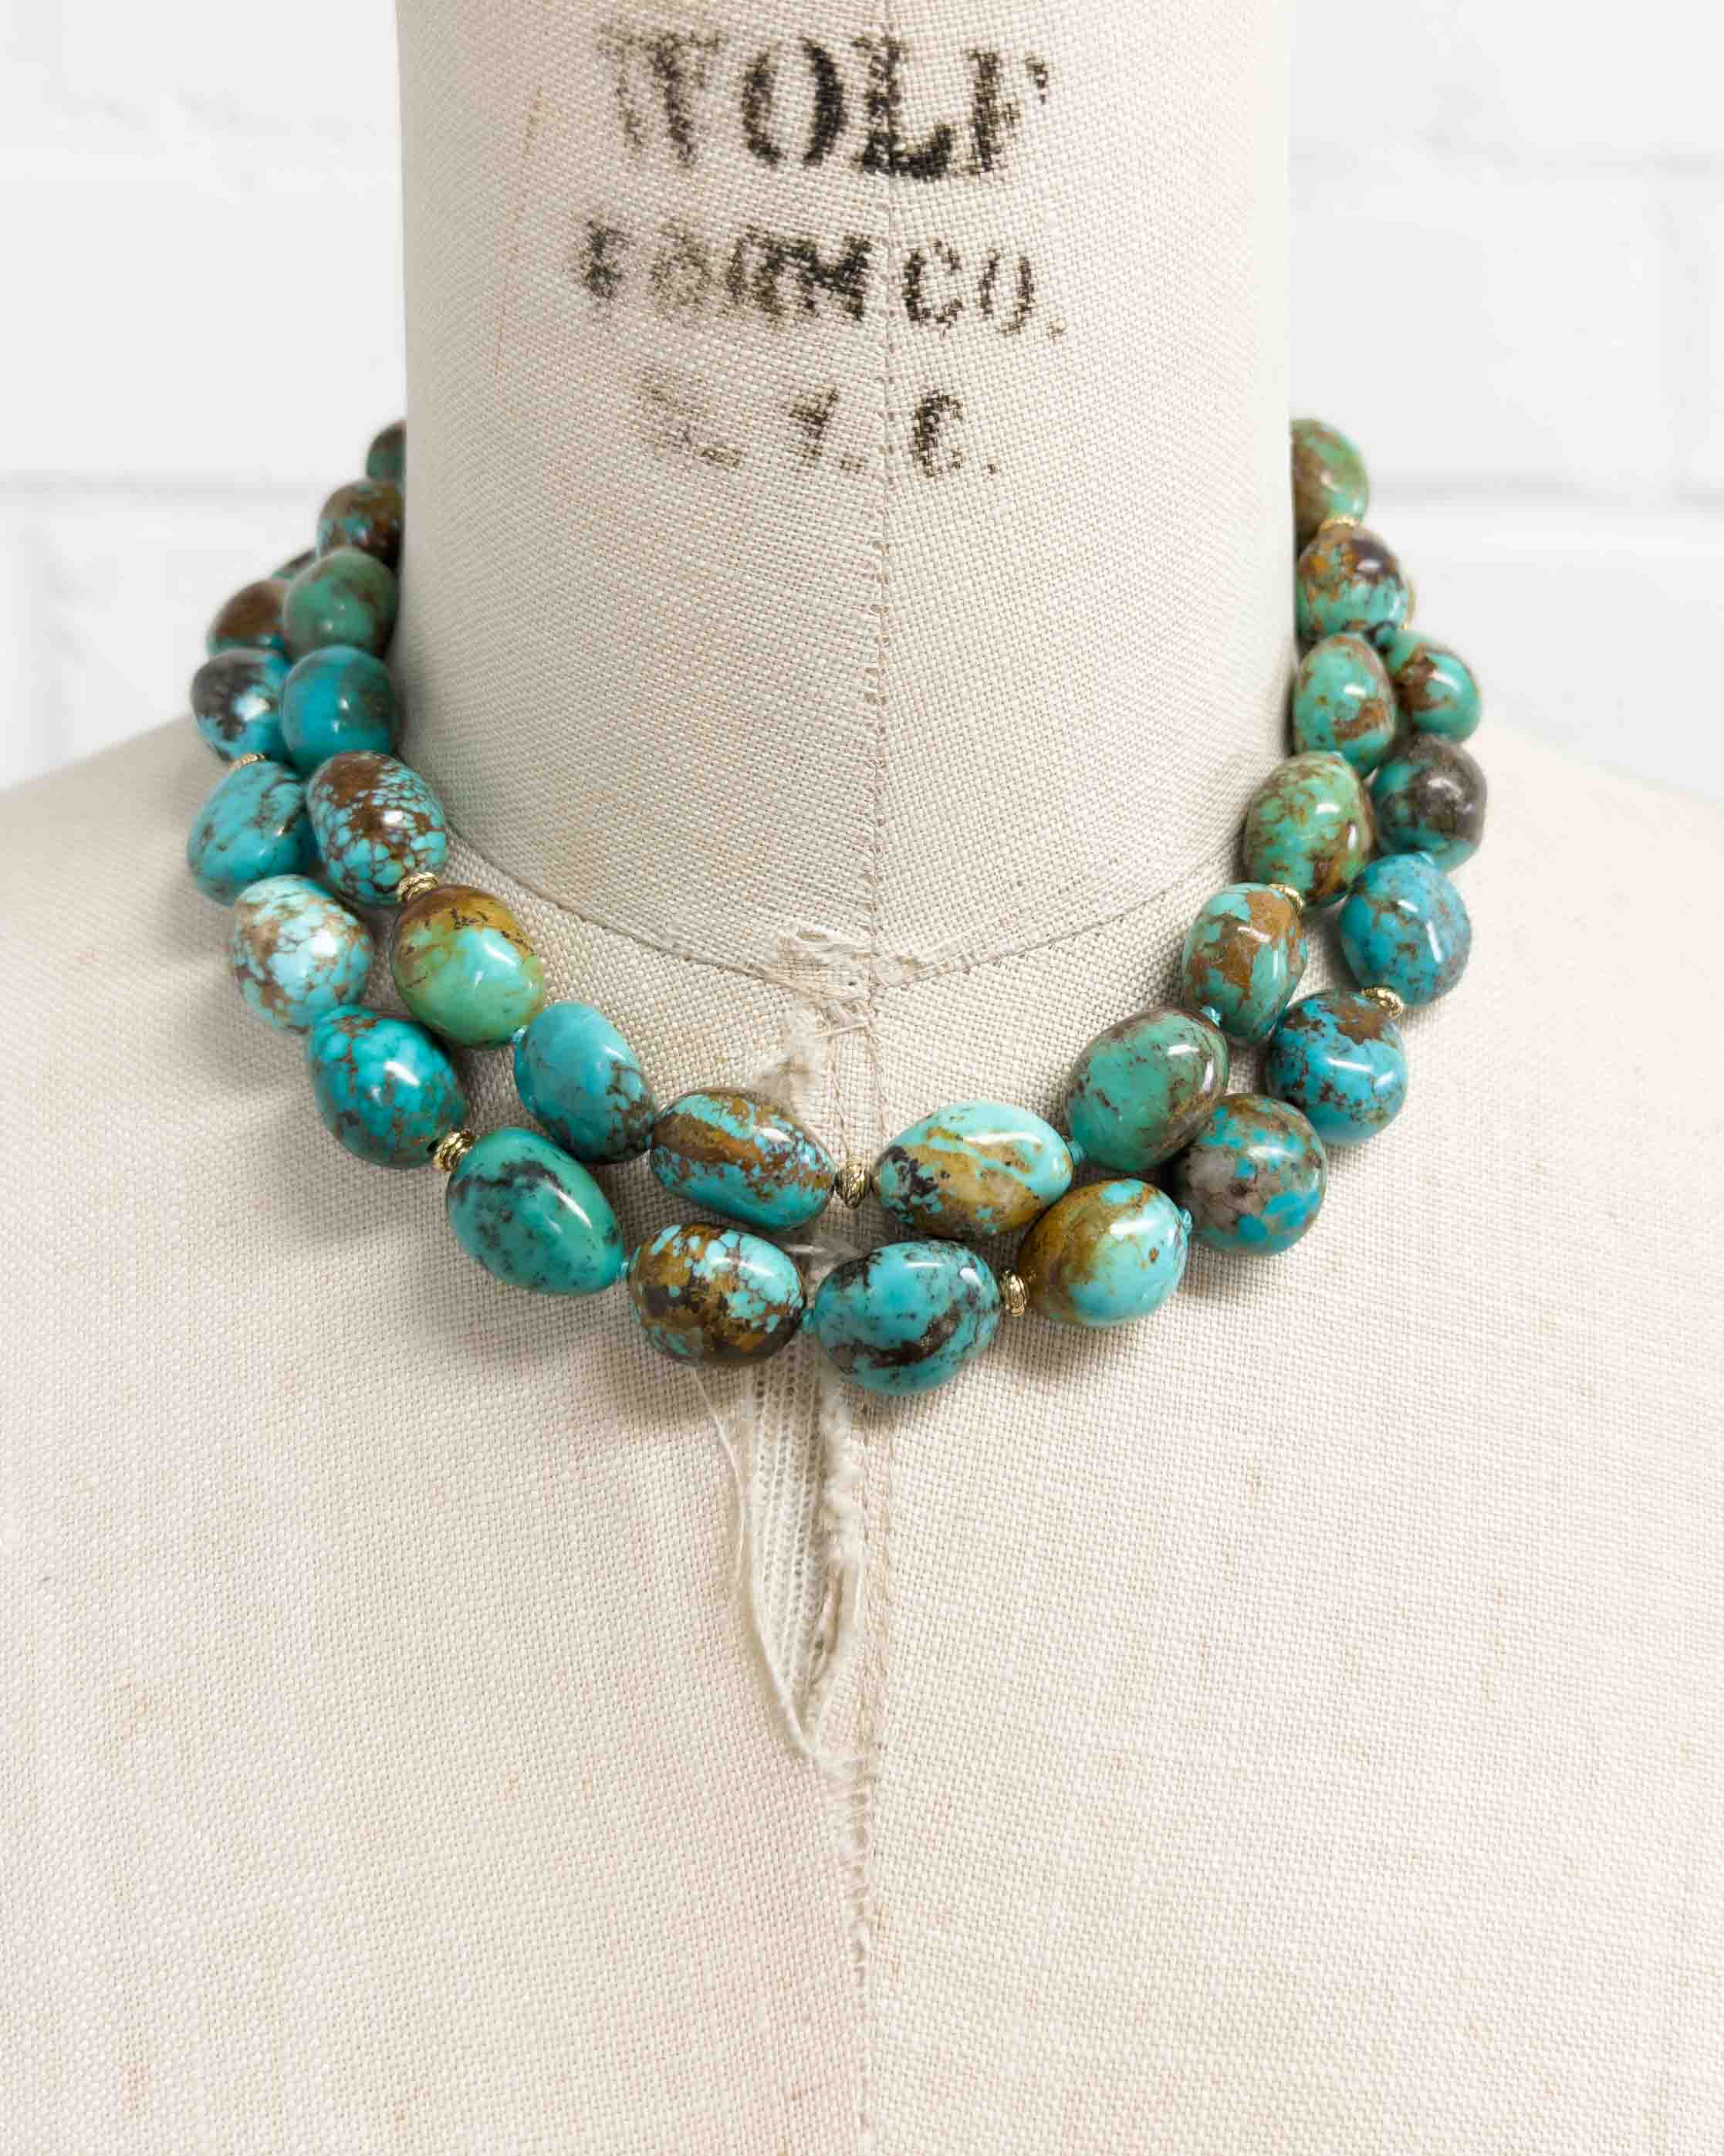 Natural Arizona Kingman Turquoise Nugget Long Knotted Necklace